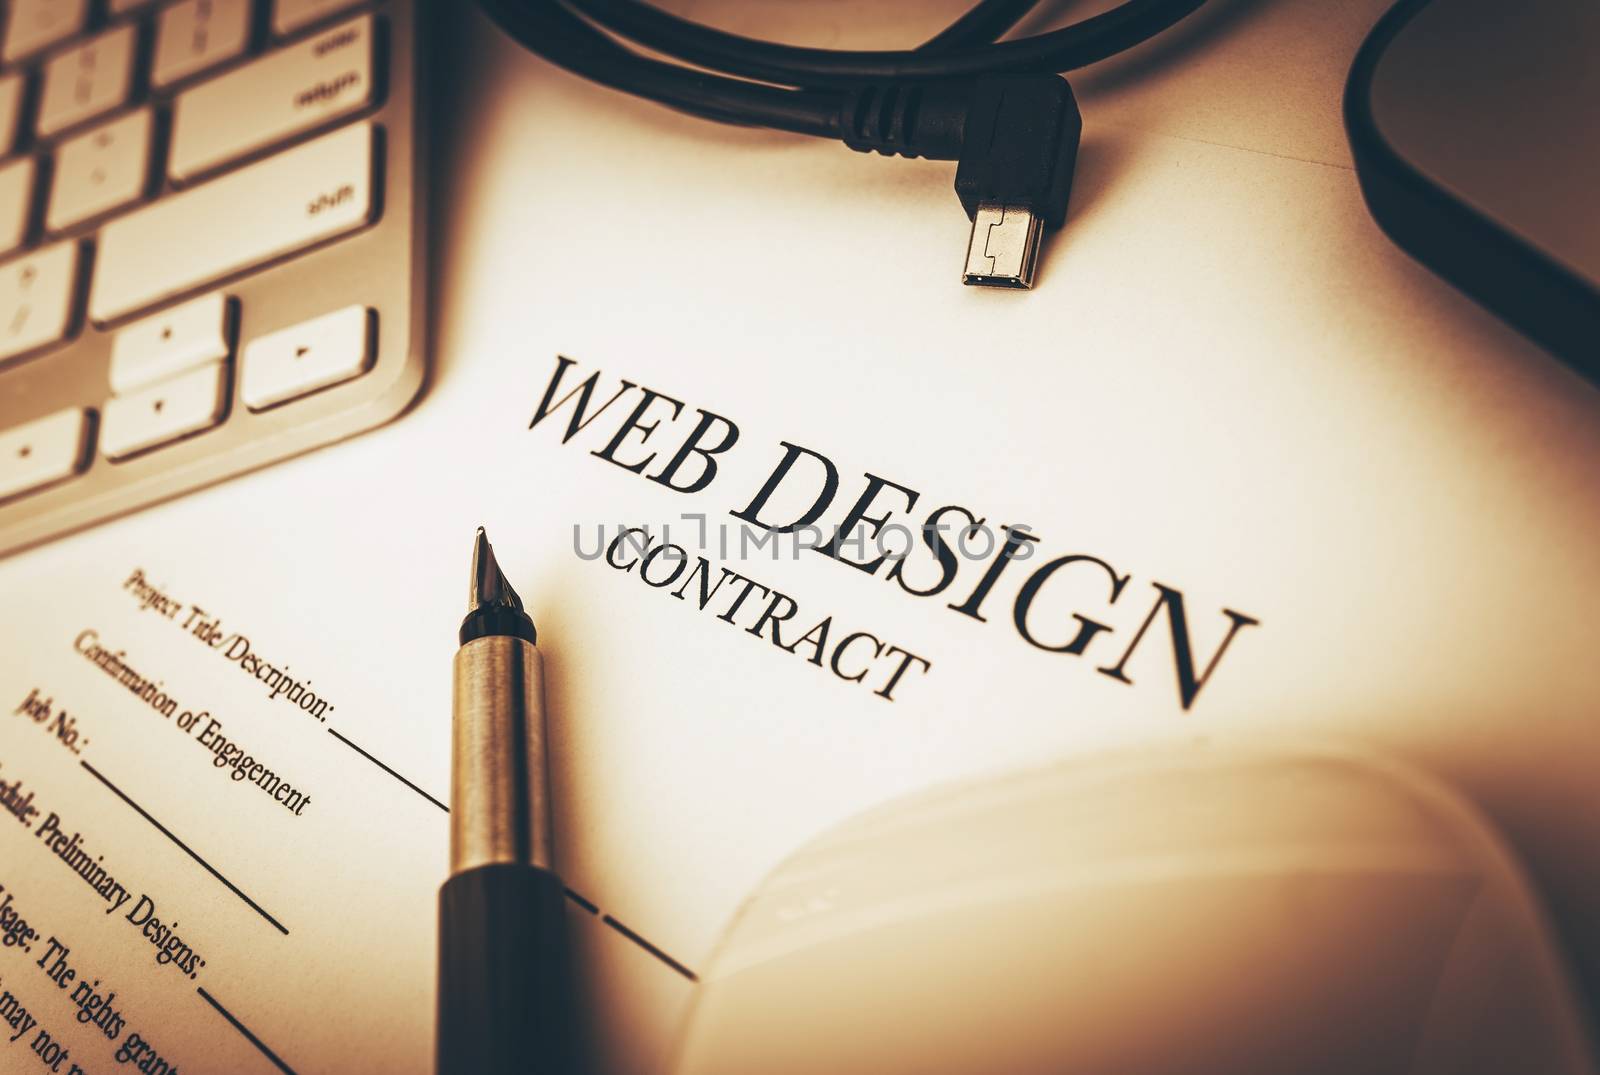 Web Design Contract by welcomia